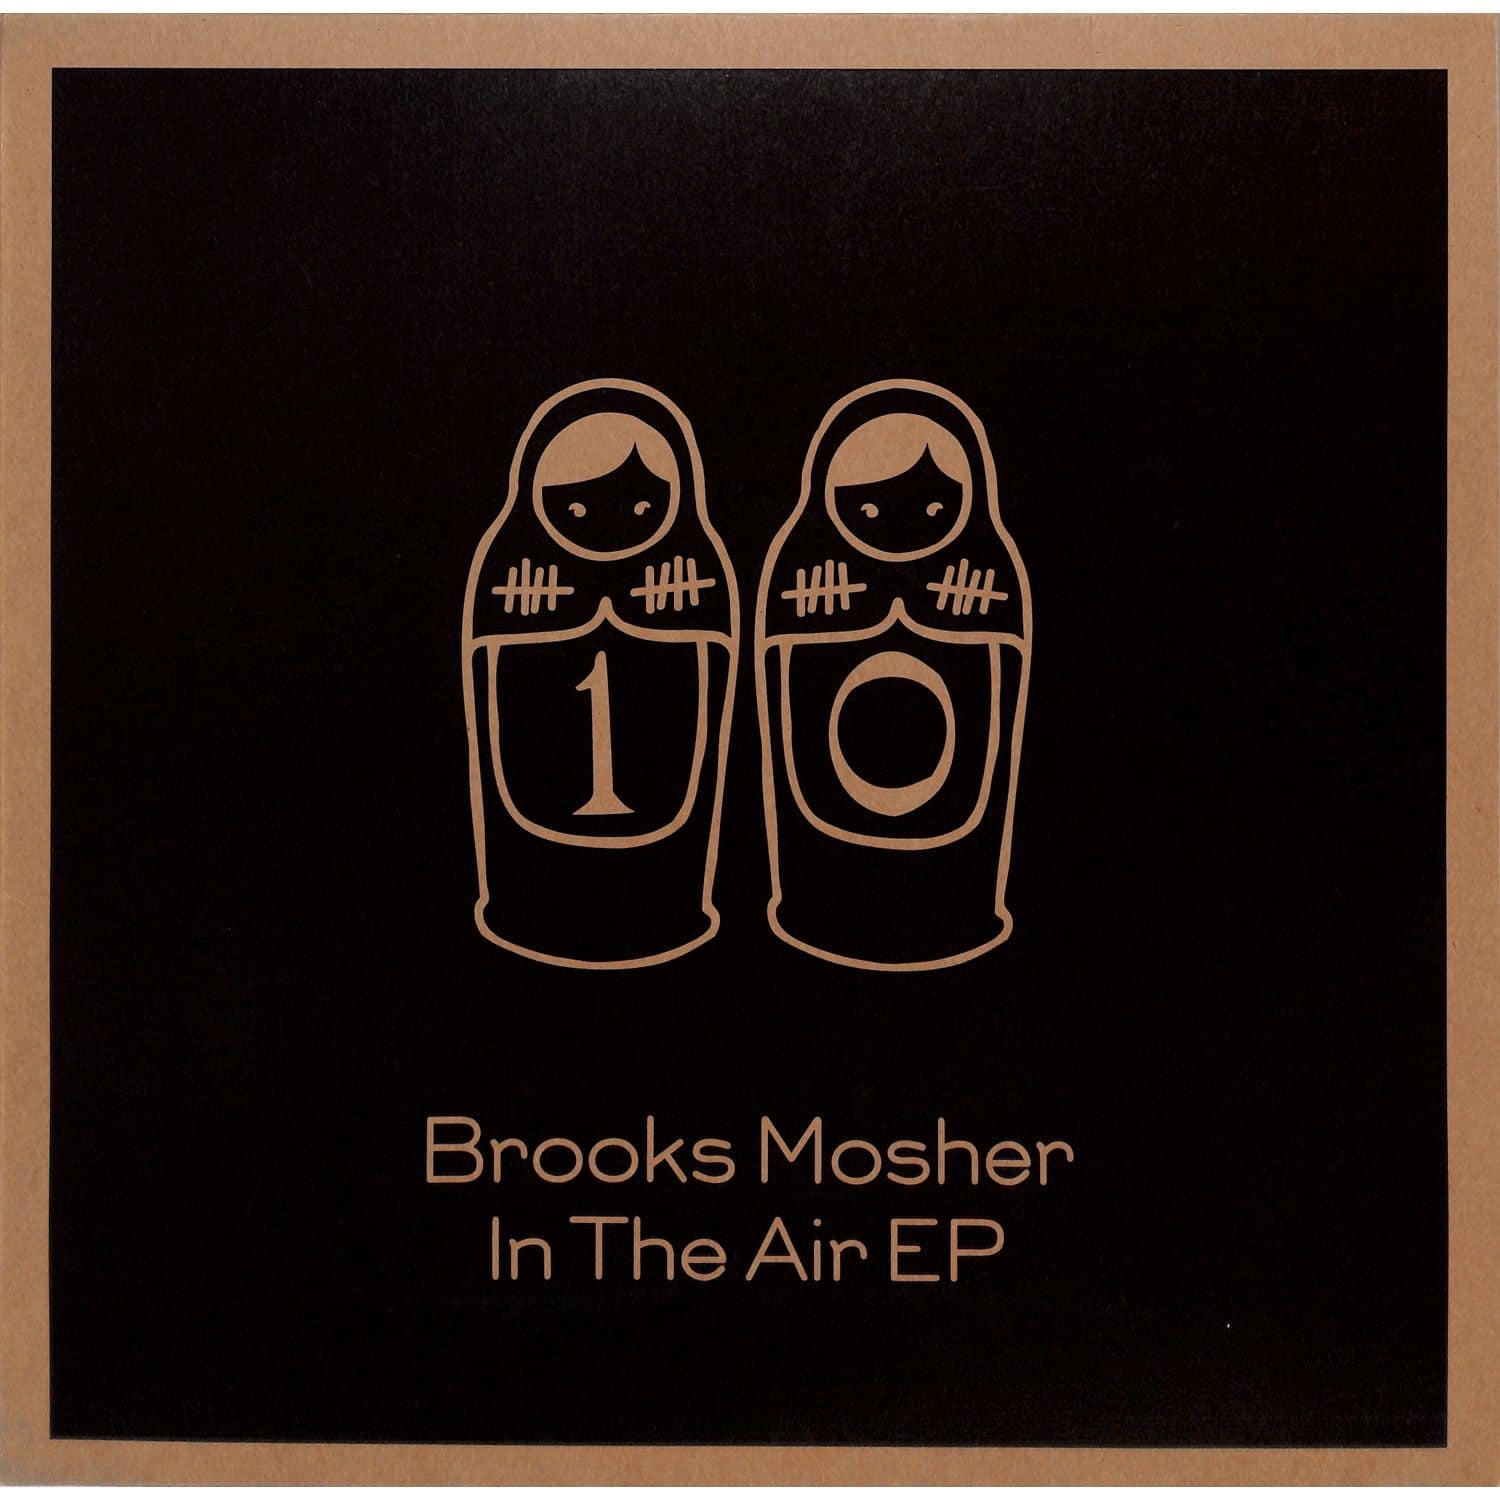 Brooks Mosher - IN THE AIR EP